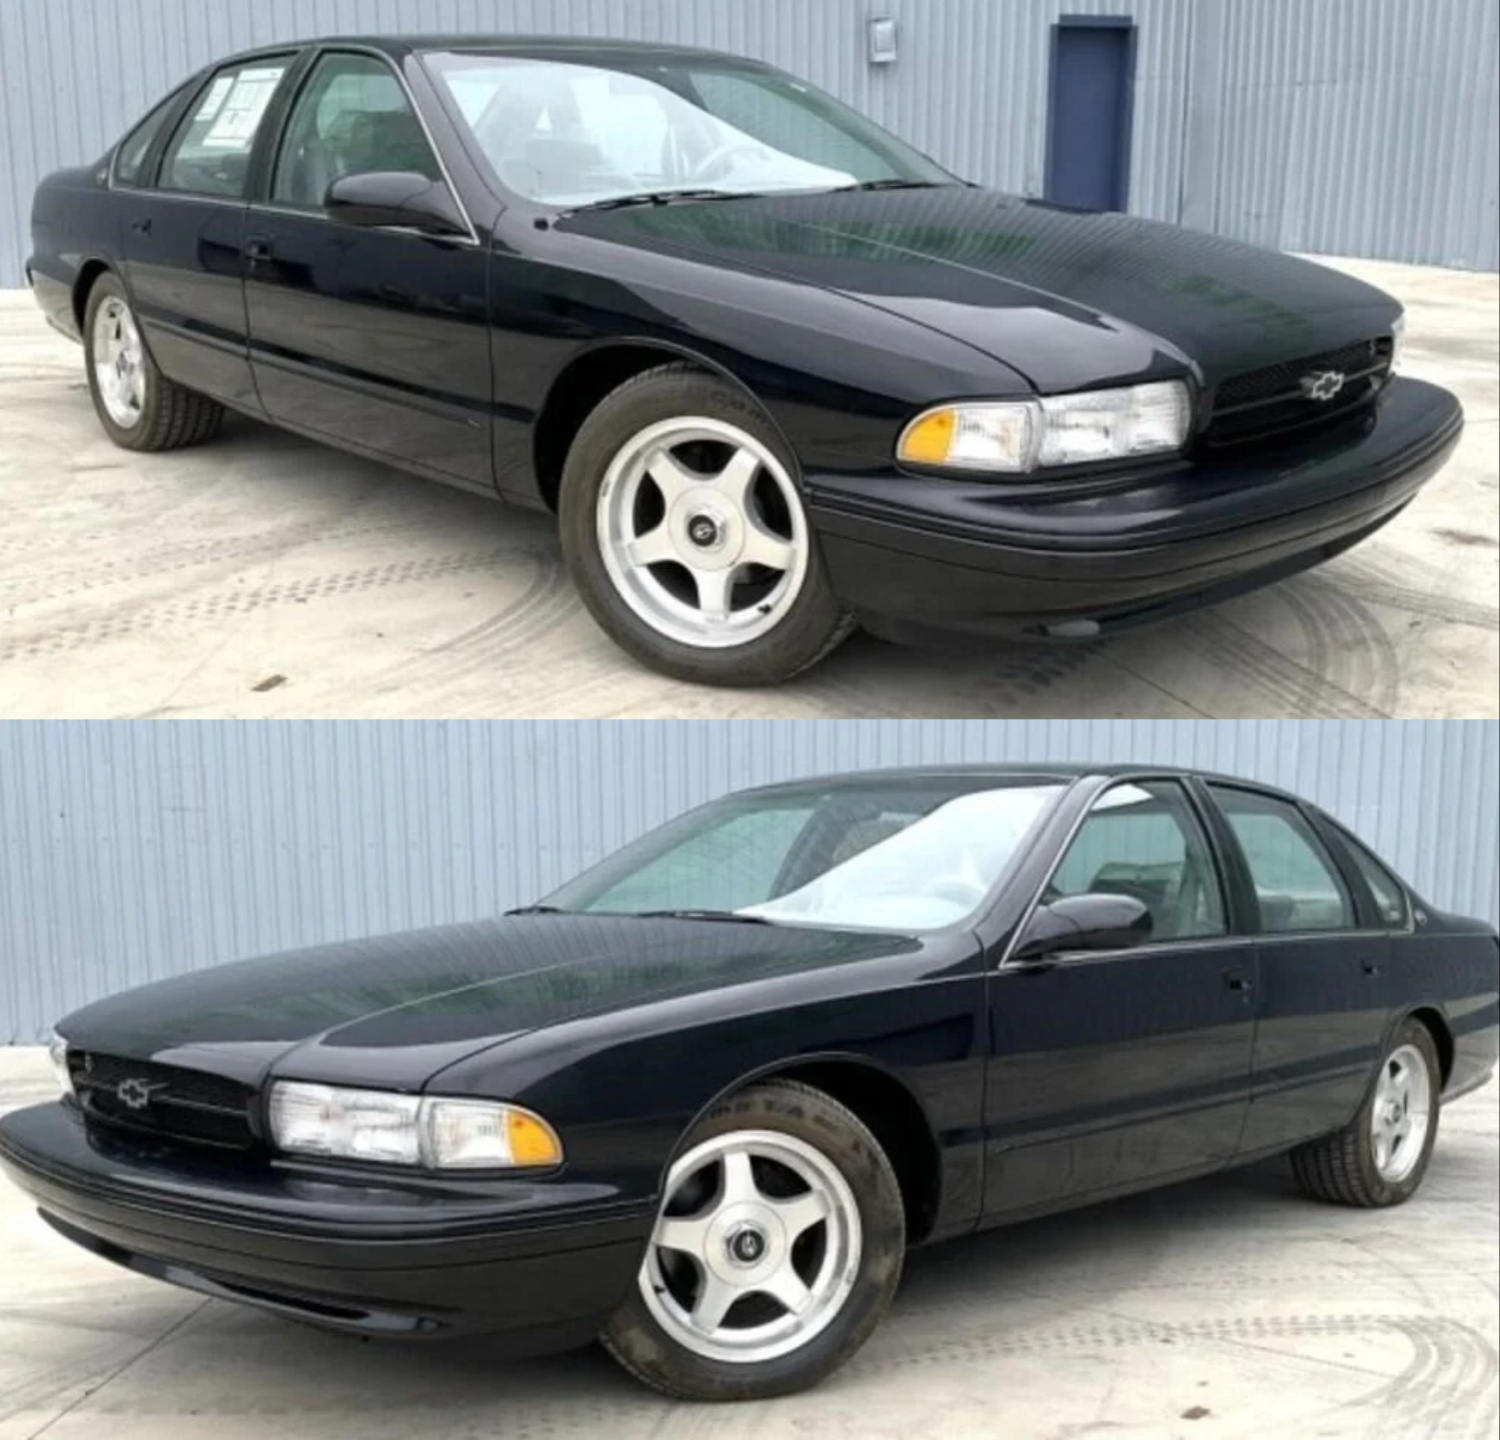 The 1996 Chevy Impala SS front end